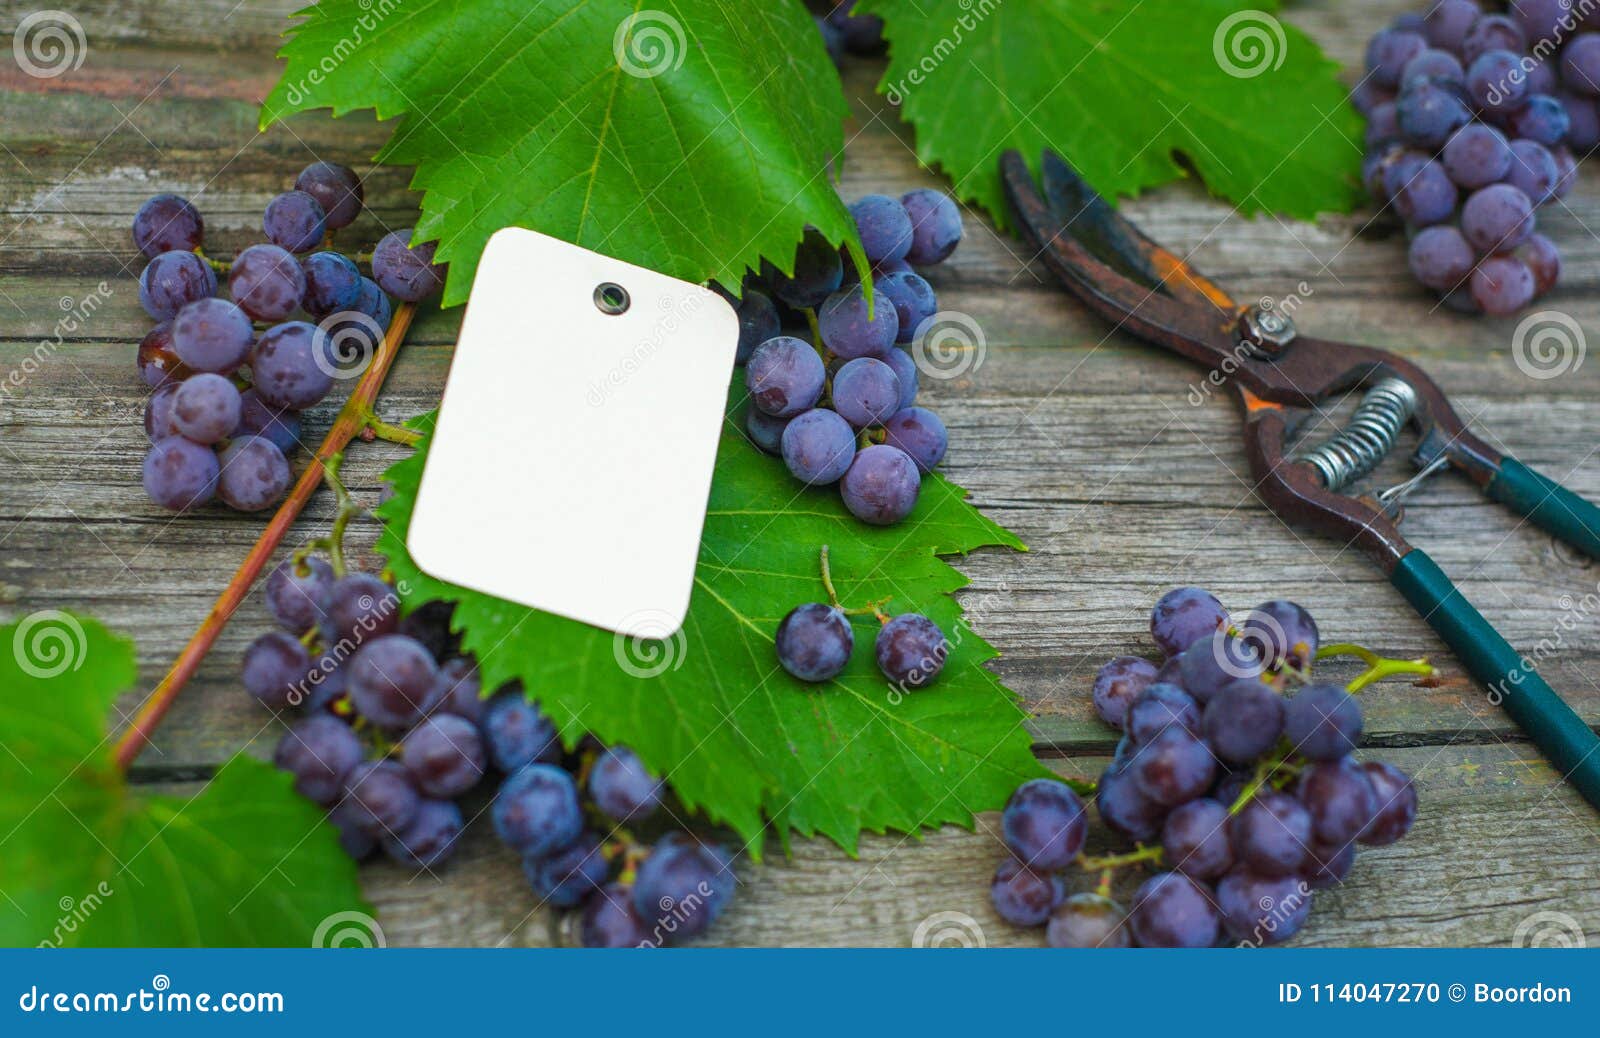 closeup-paper-tag-template-on-grapes-secateurs-with-vine-and-grapes